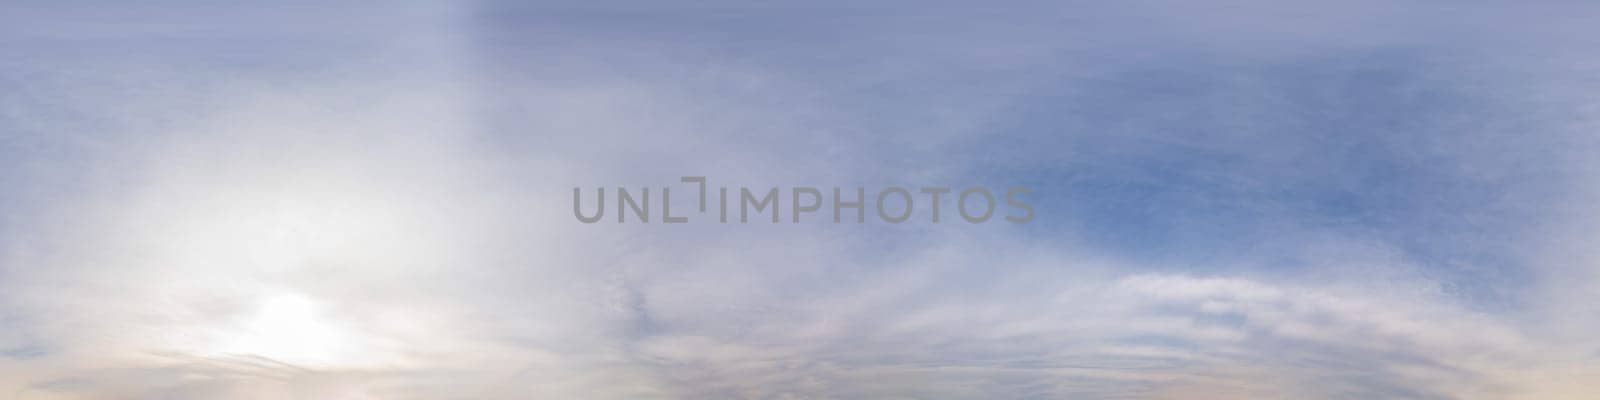 Sky panorama with Altostratus clouds in Seamless spherical equirectangular format as full zenith for use in 3D graphics, game and composites in aerial drone 360 degree panoramas for sky replacement. by panophotograph